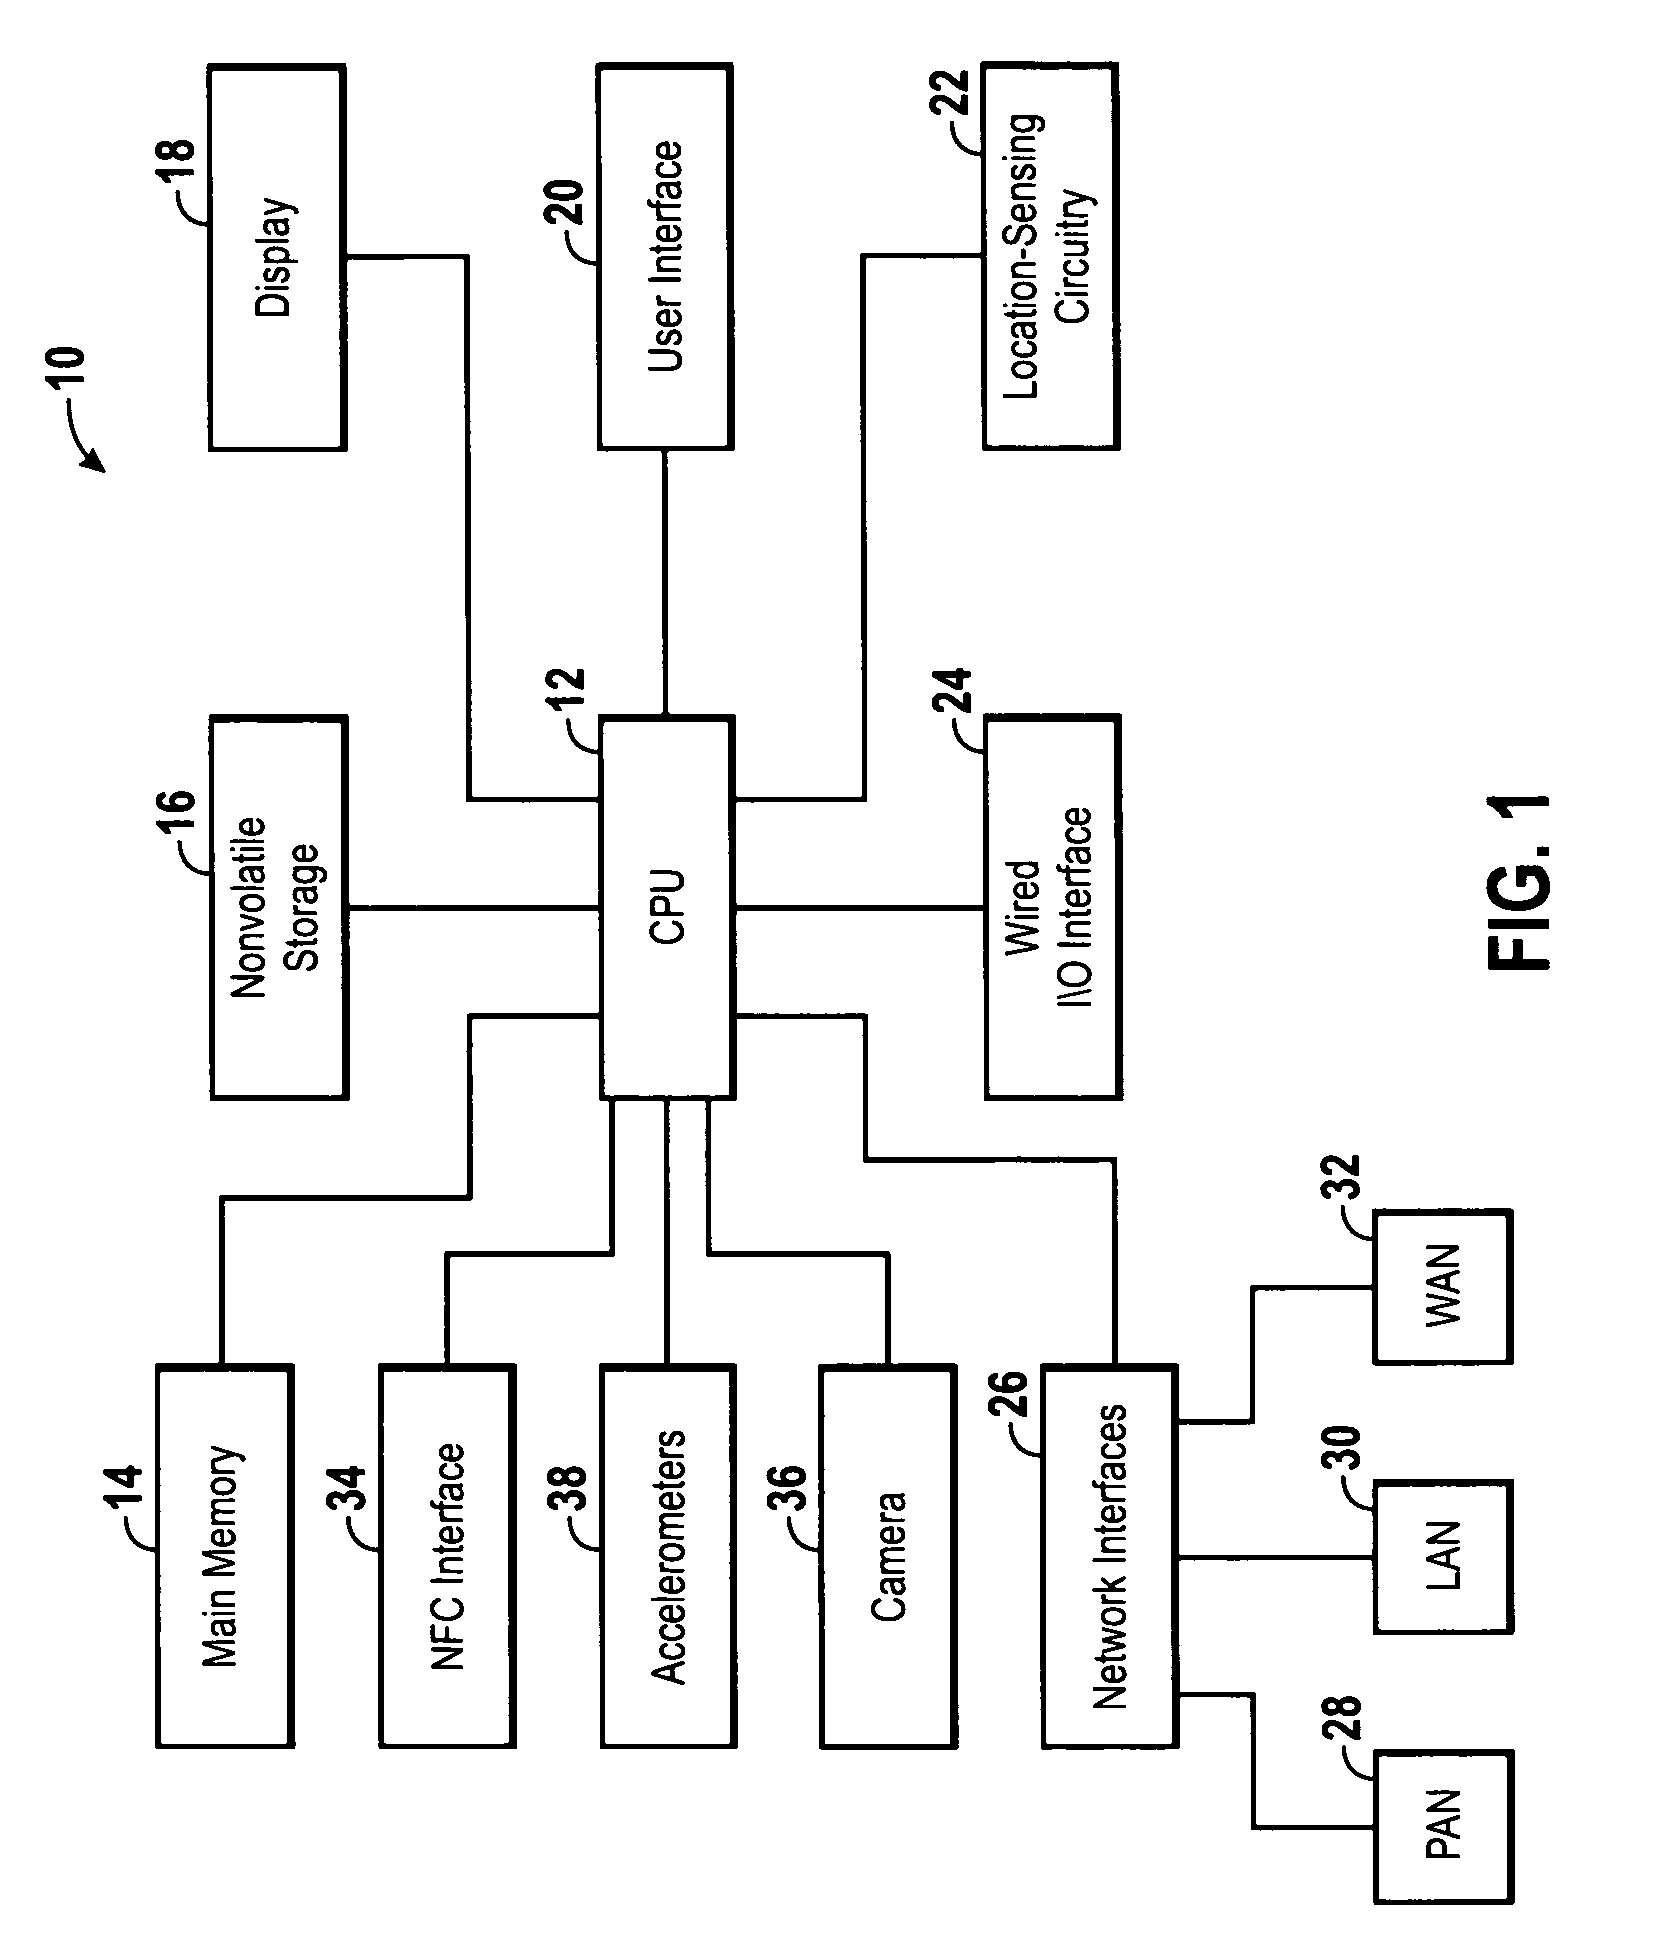 System and method for transportation check-in